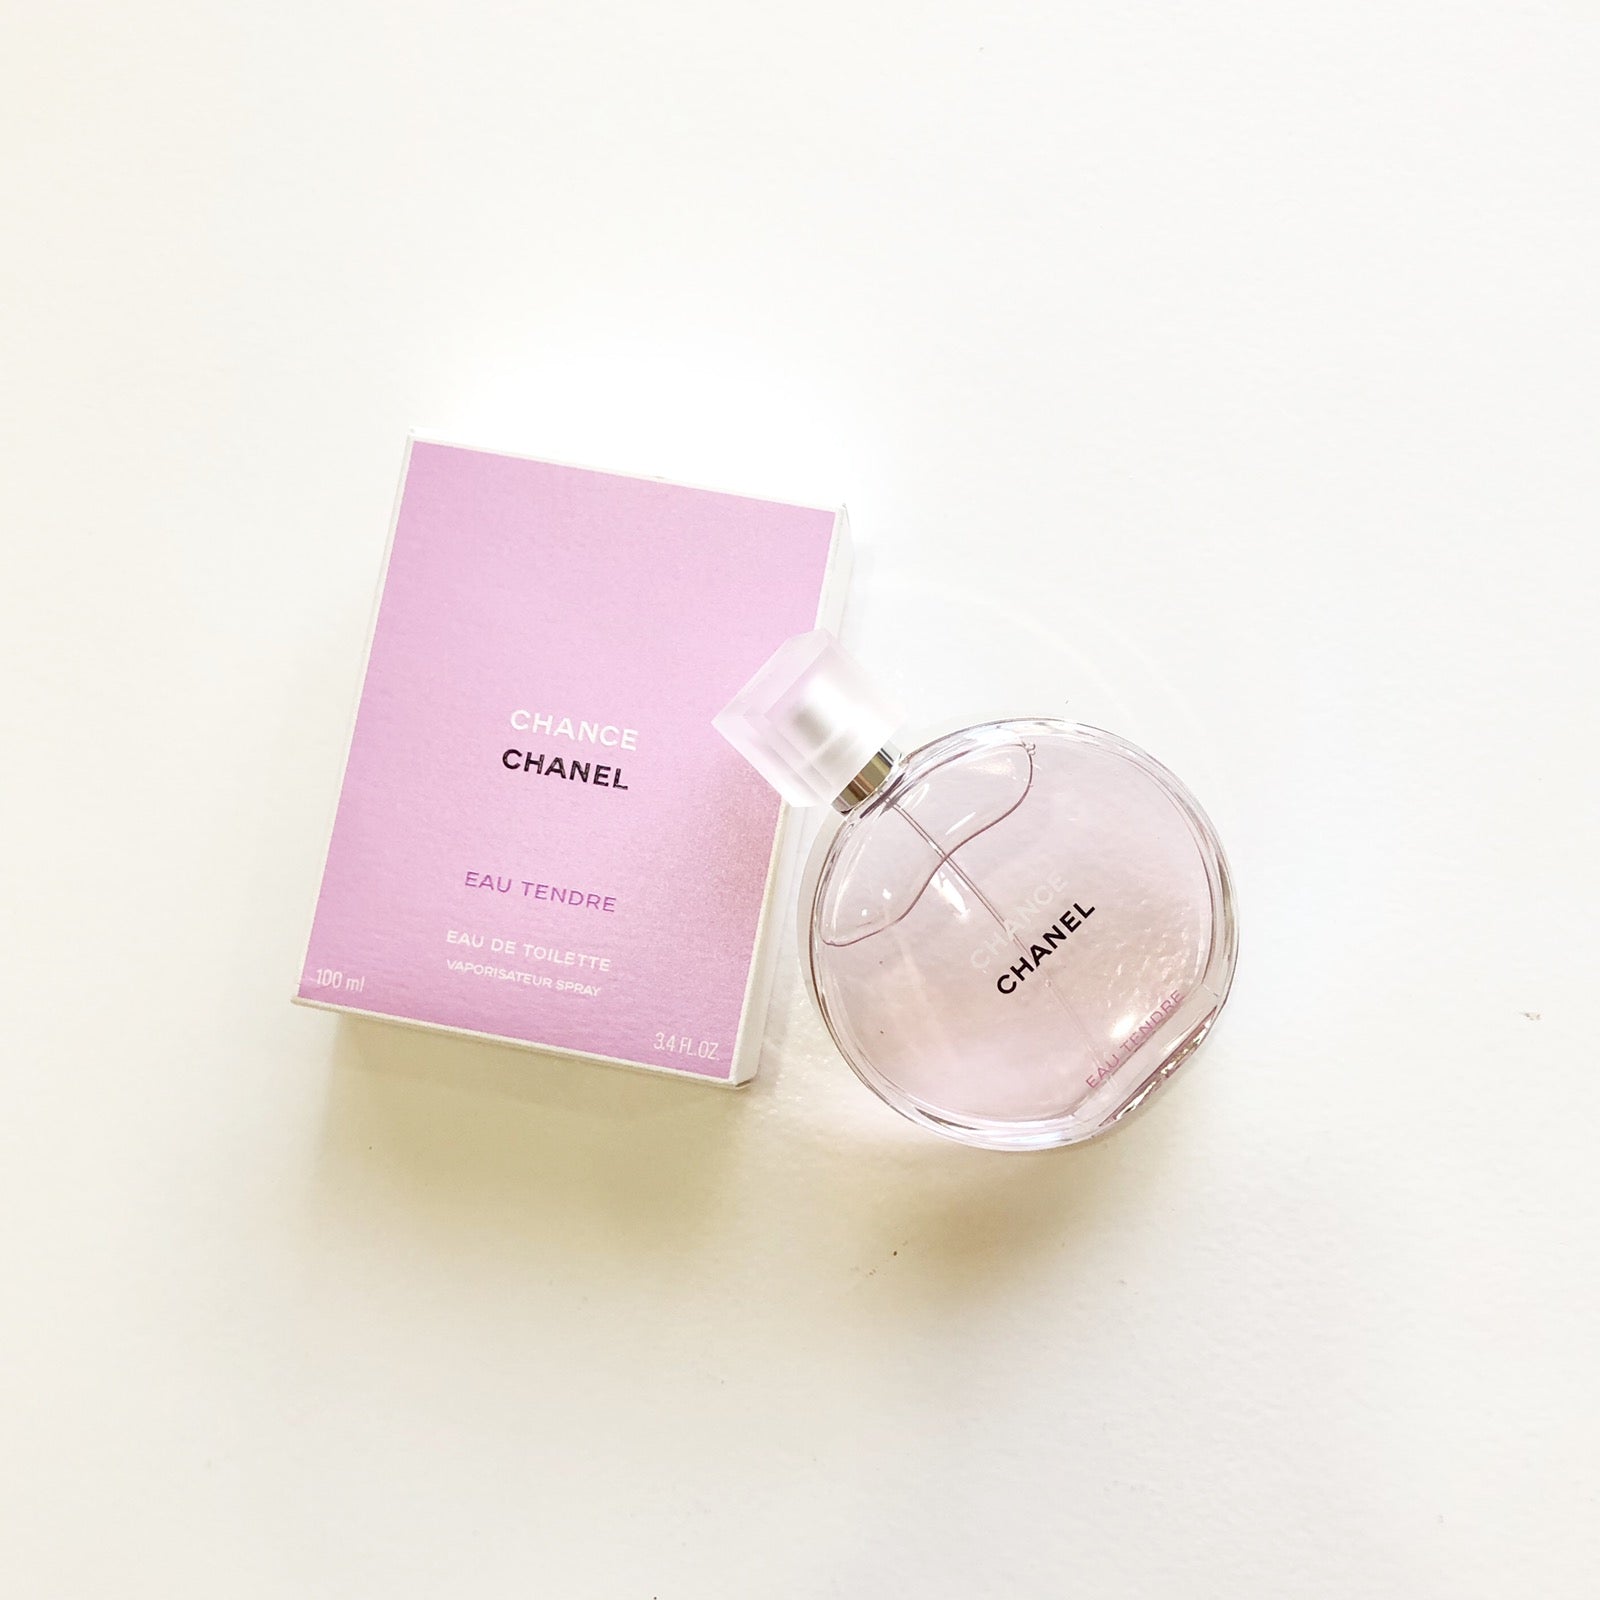 CHANEL CHANCE EAU TENDRE FOR WOMEN PerfumeStore Philippines